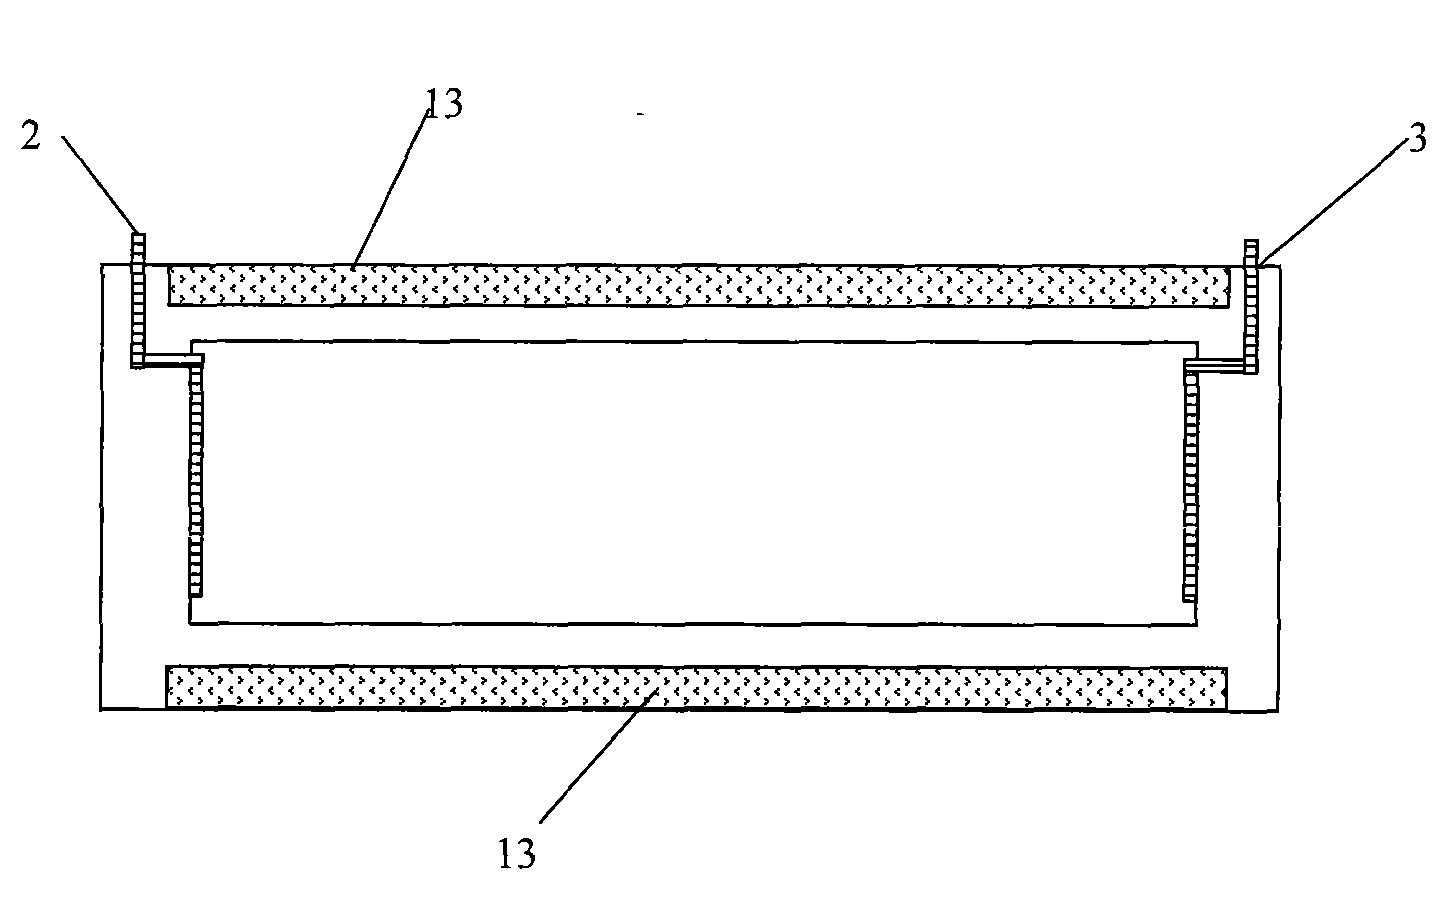 Liquid metal cutting magnetic line type power generating device based on human body energy drive